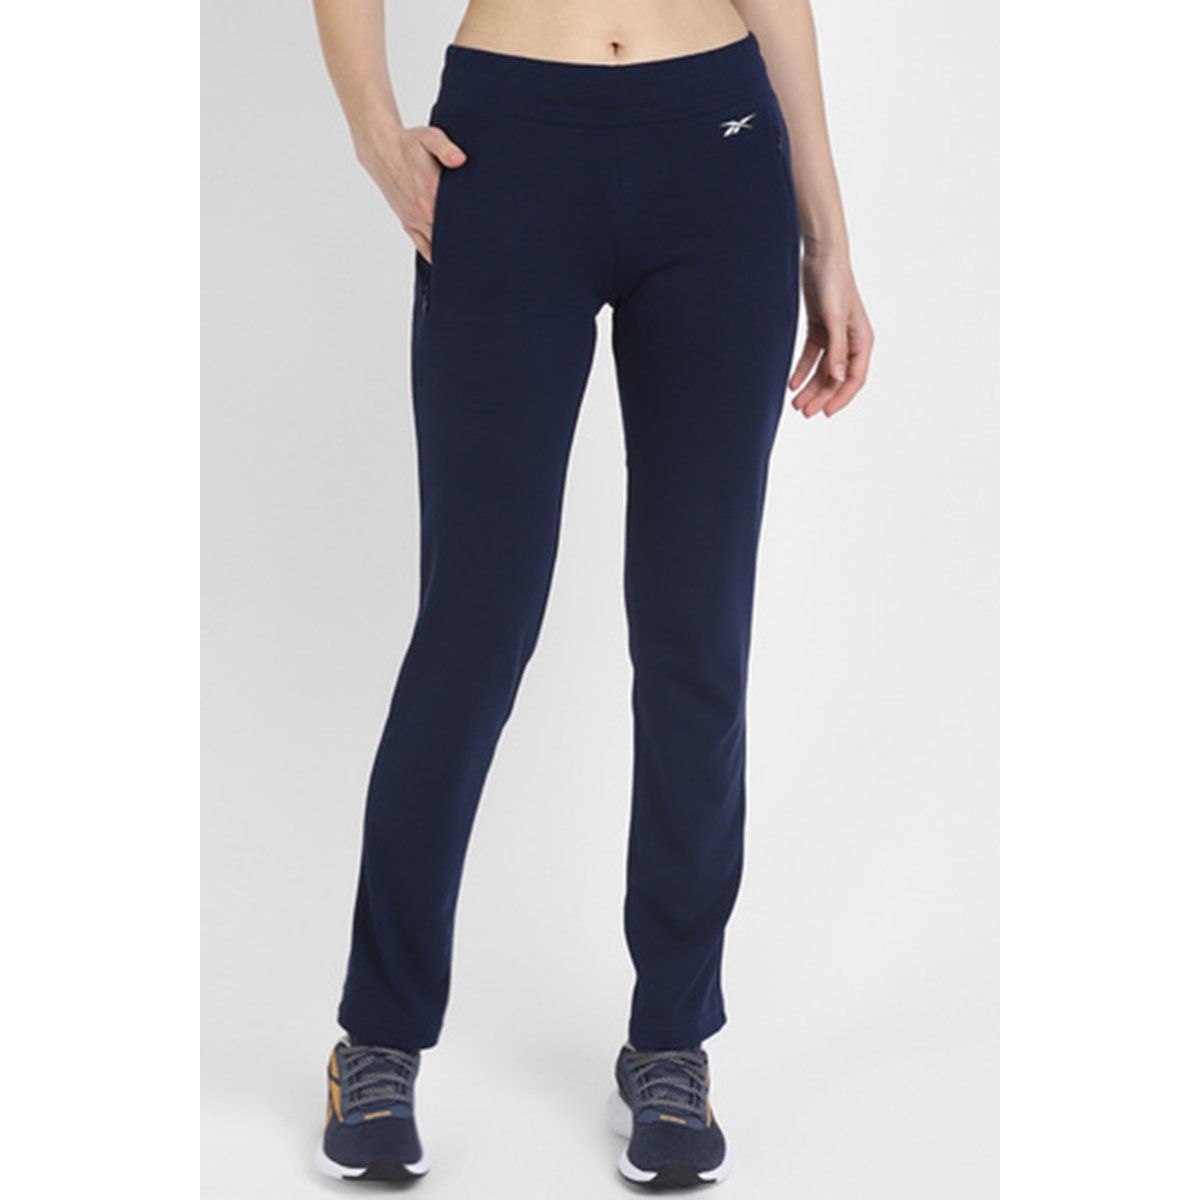 SPUNK by FBB Women's Track Pants (SPBT1673_Black_M) : Amazon.in: Clothing &  Accessories